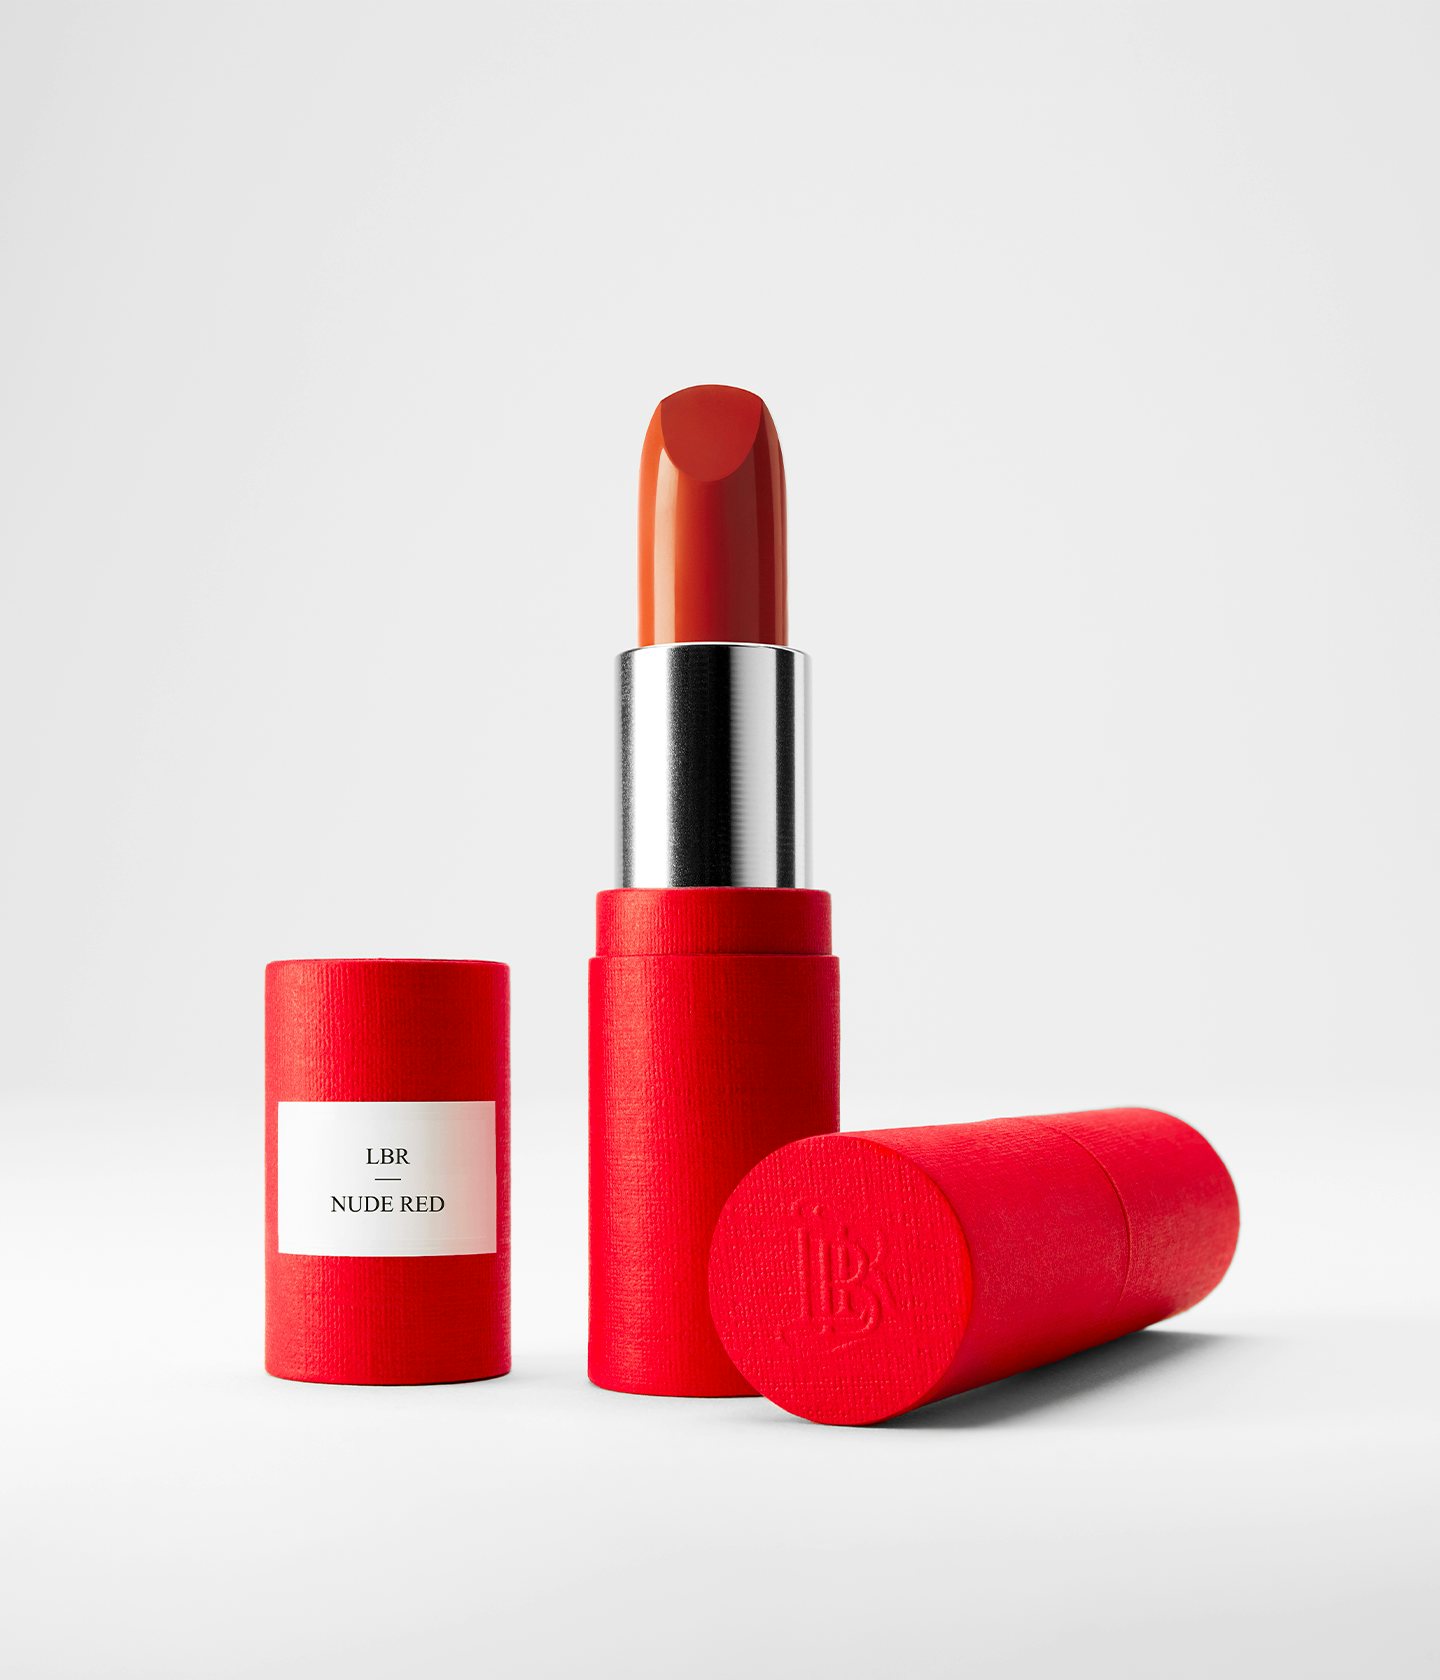 La bouche rouge Nude Red lipstick shade in the red paper case